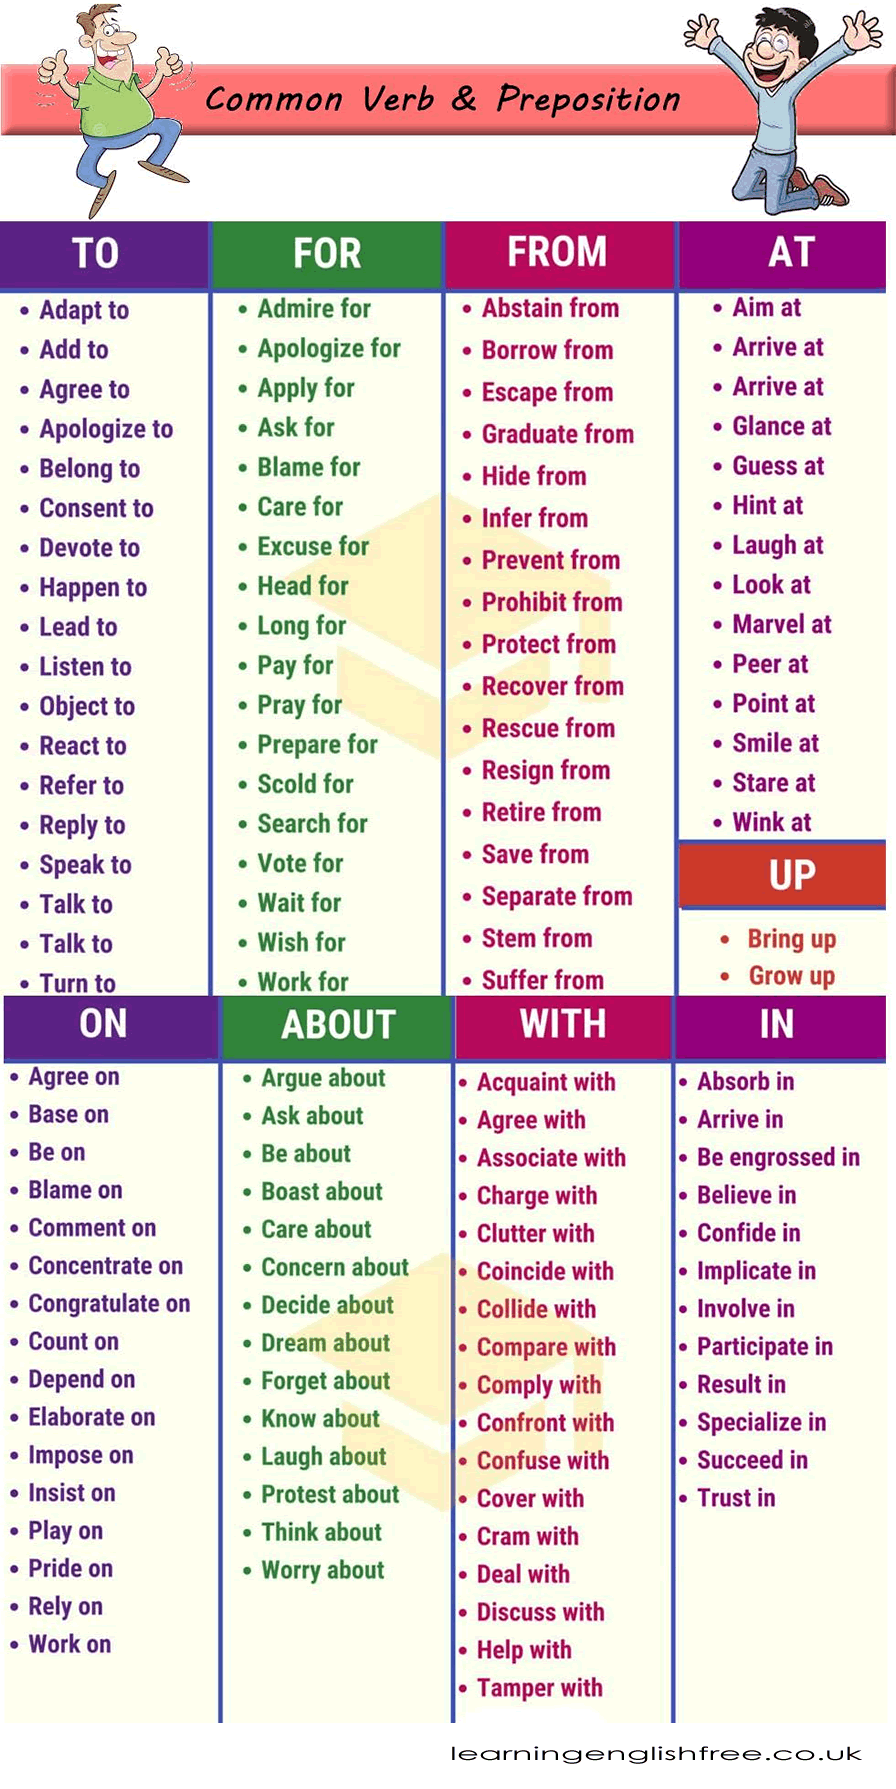 This lesson provides a comprehensive overview of verb and preposition combinations in English, offering meanings and examples for each. It's designed to help learners effectively use these combinations in daily communication, enhancing both their understanding and fluency in English.